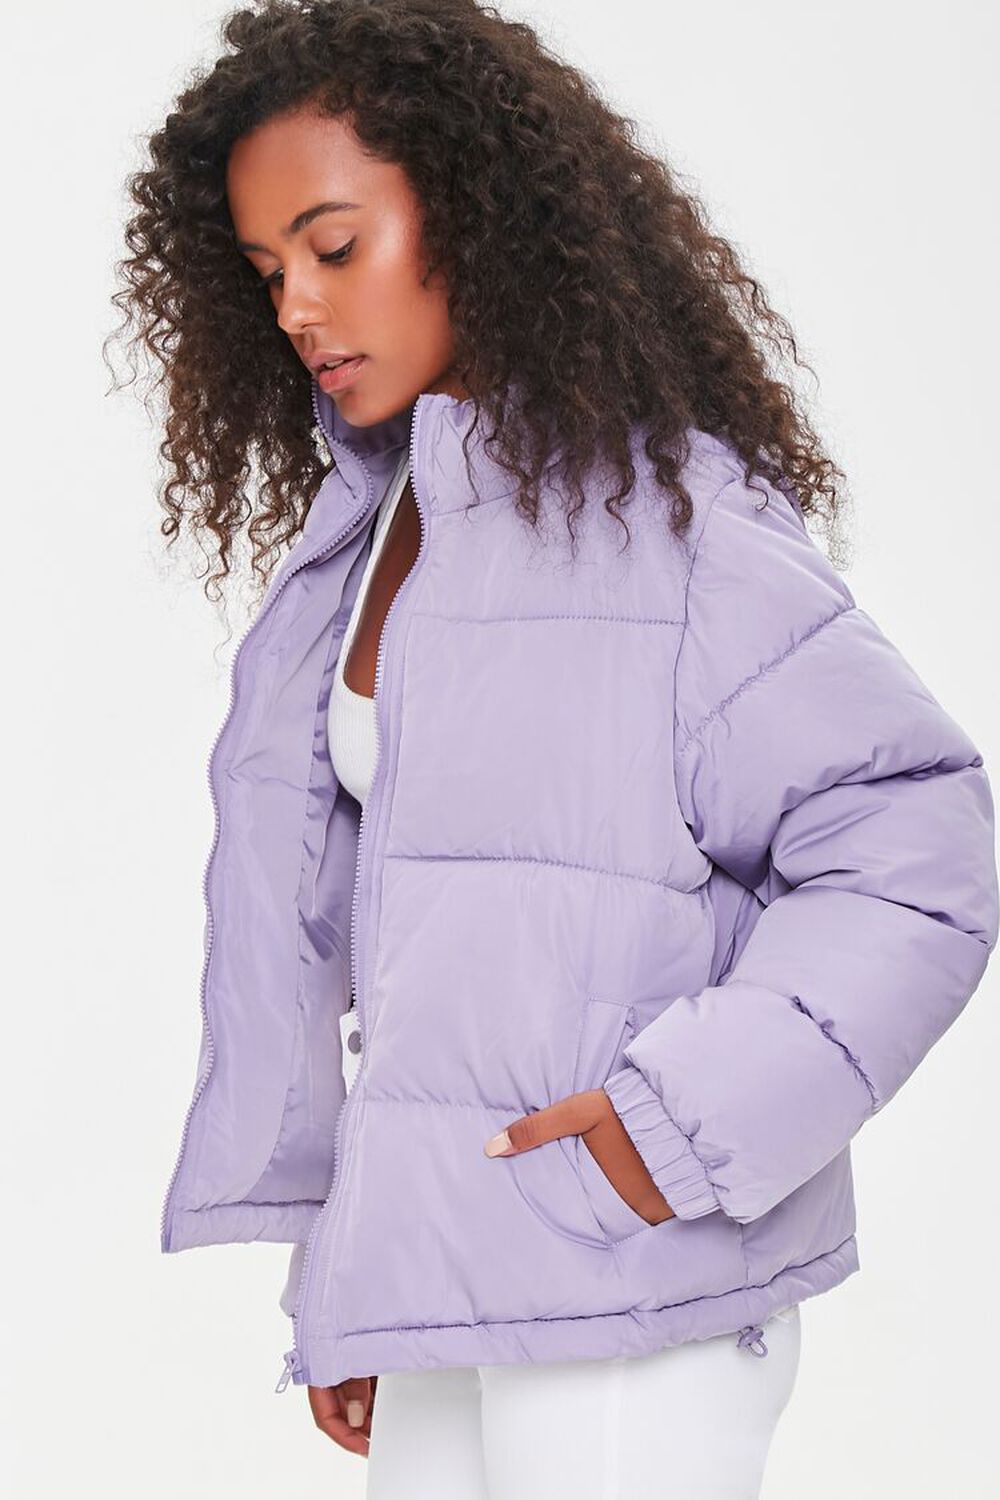 LAVENDER Quilted Puffer Jacket, image 2